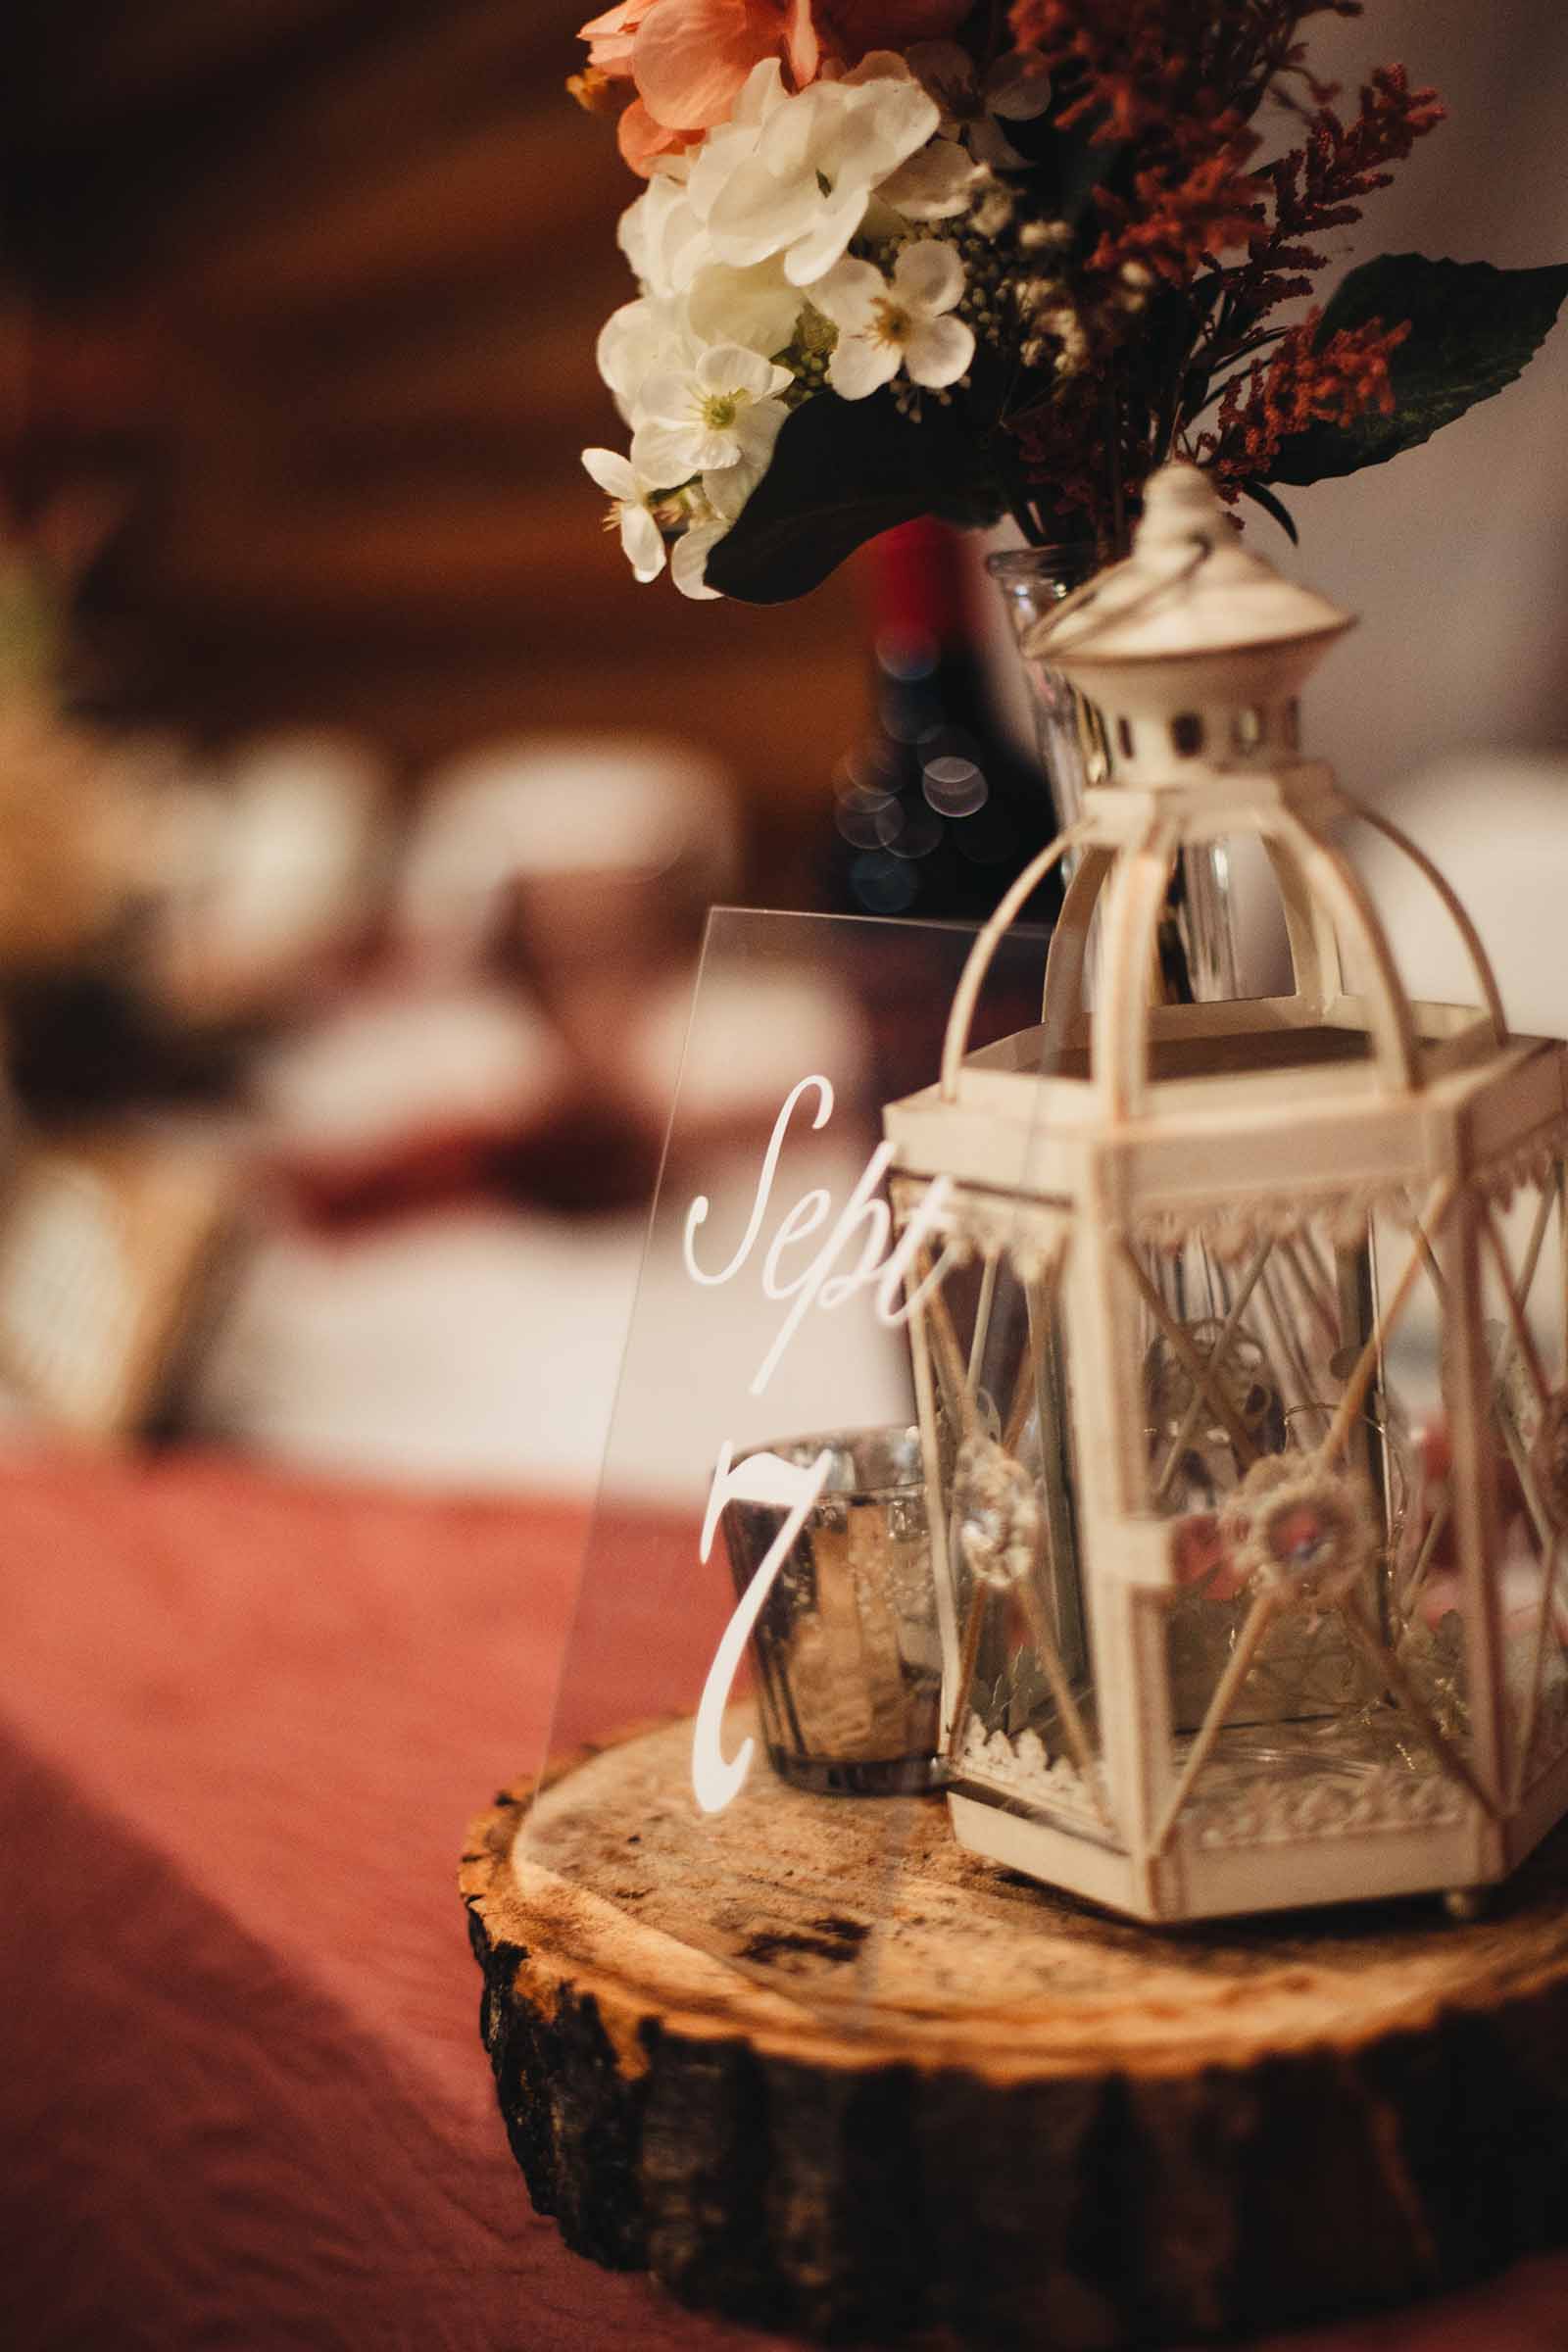 decorations on a table